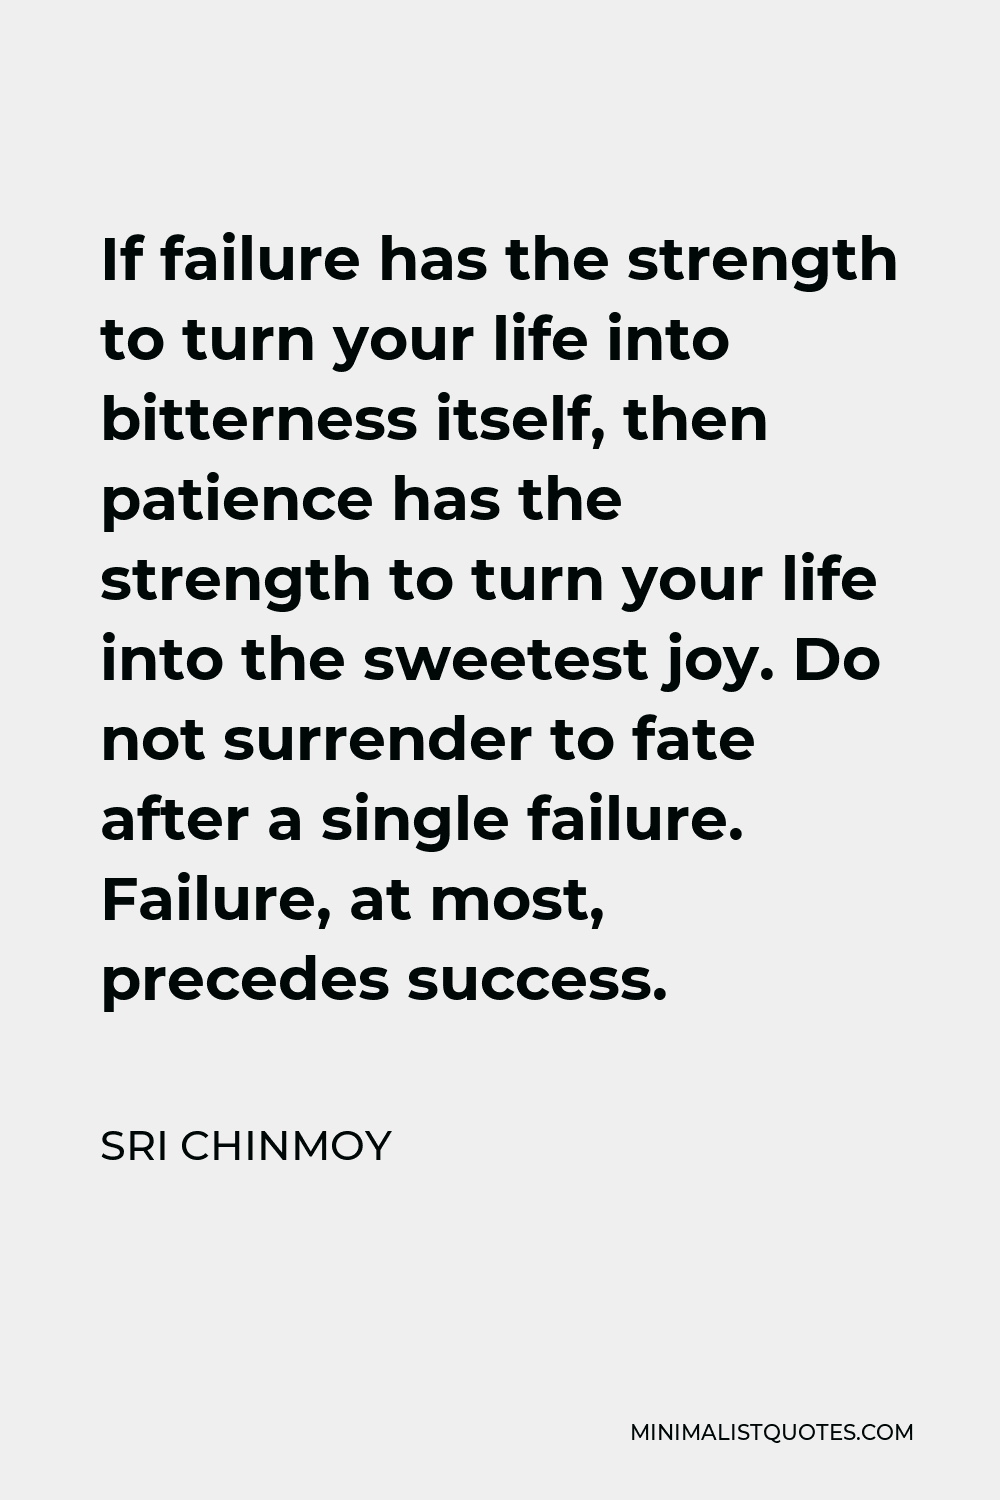 Sri Chinmoy Quote - If failure has the strength to turn your life into bitterness itself, then patience has the strength to turn your life into the sweetest joy. Do not surrender to fate after a single failure. Failure, at most, precedes success.